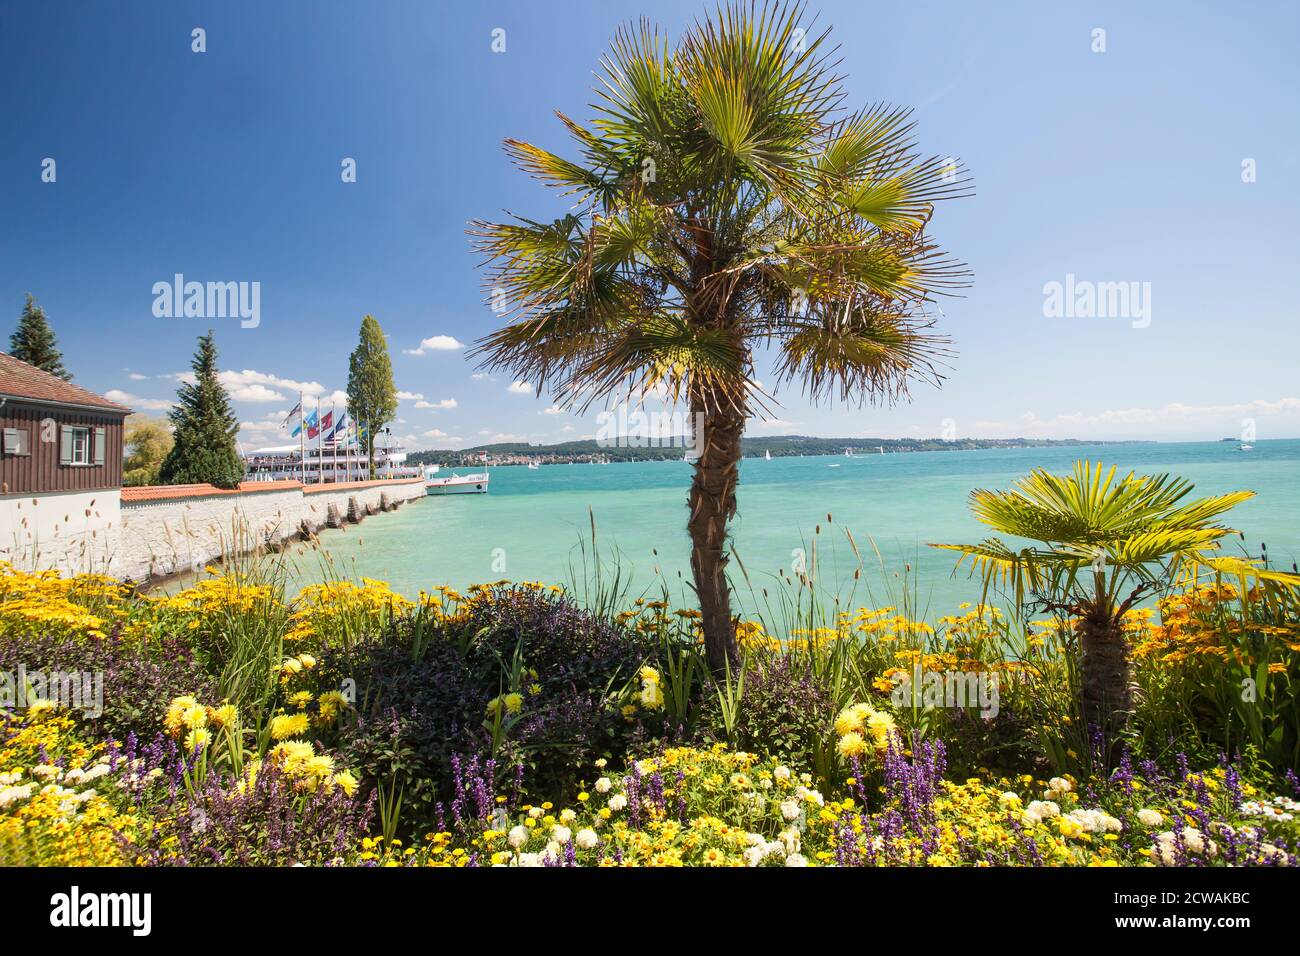 Palm trees with blooming flowers, spring, Mainau Island, Flower Island, Constance, Lake Constance, Baden-Württemberg, Germany, Europe Stock Photo